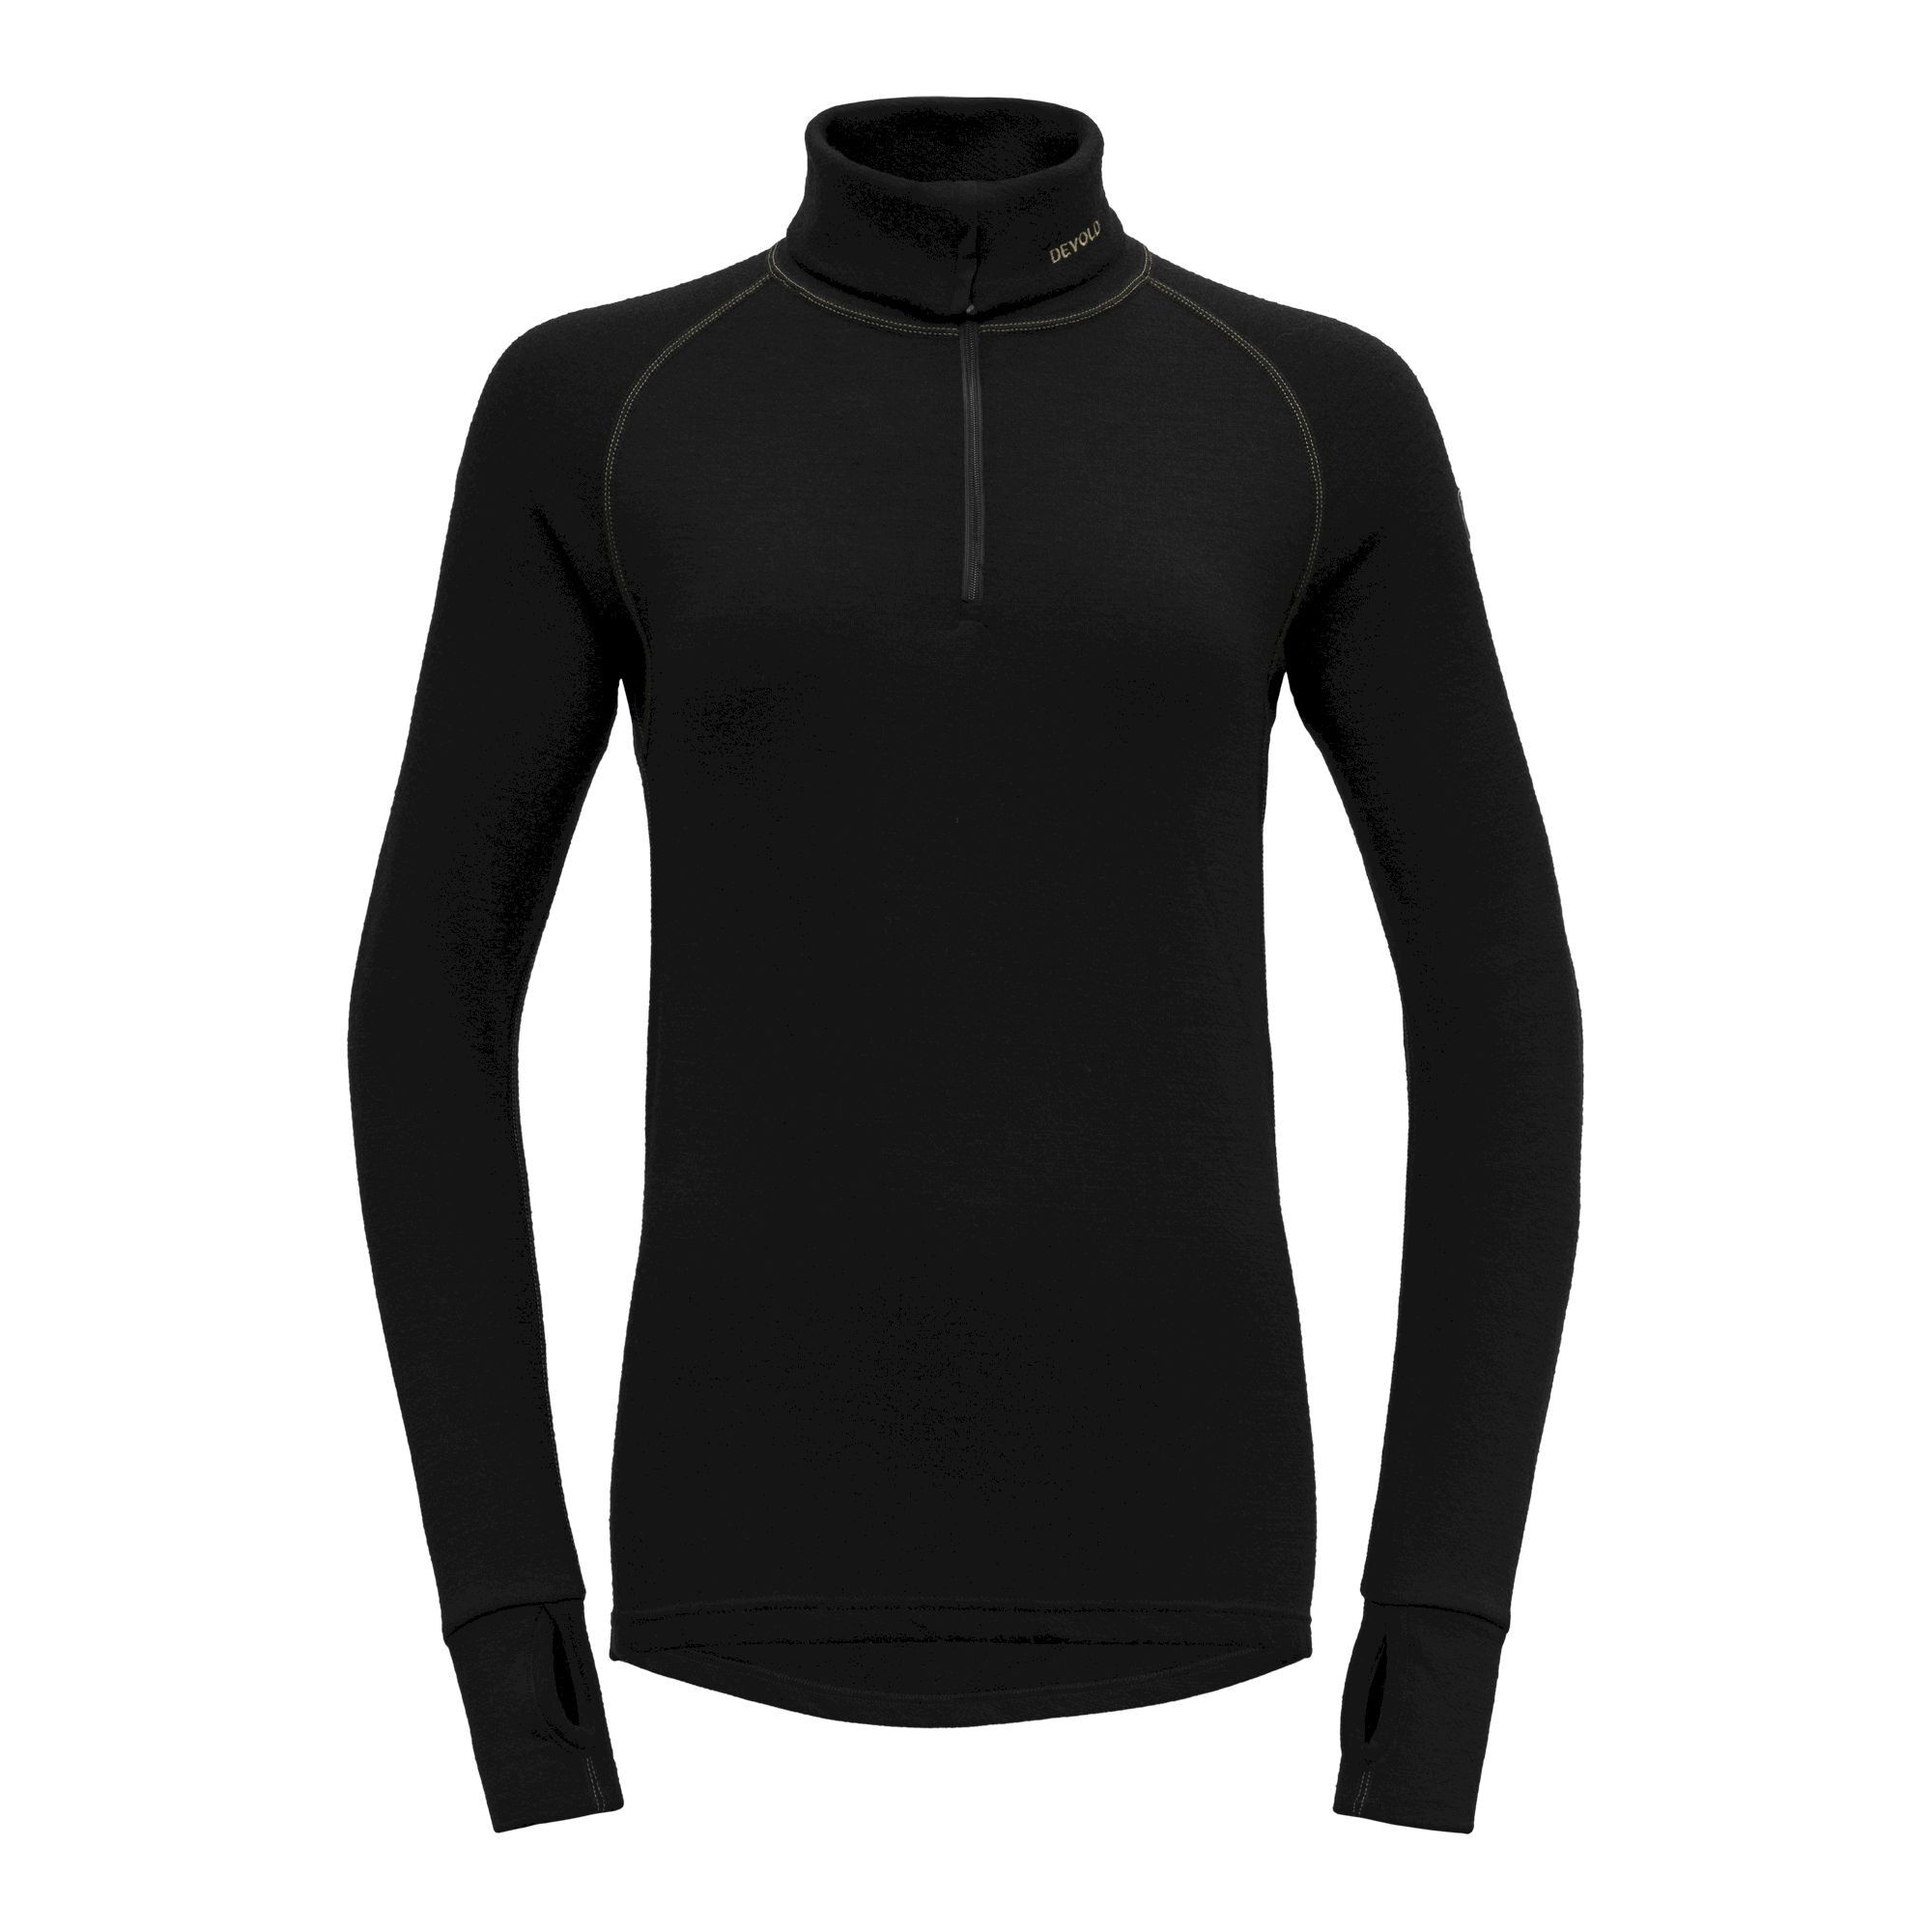 Devold Expedition Woman Zip Neck - Ropa interior - Mujer